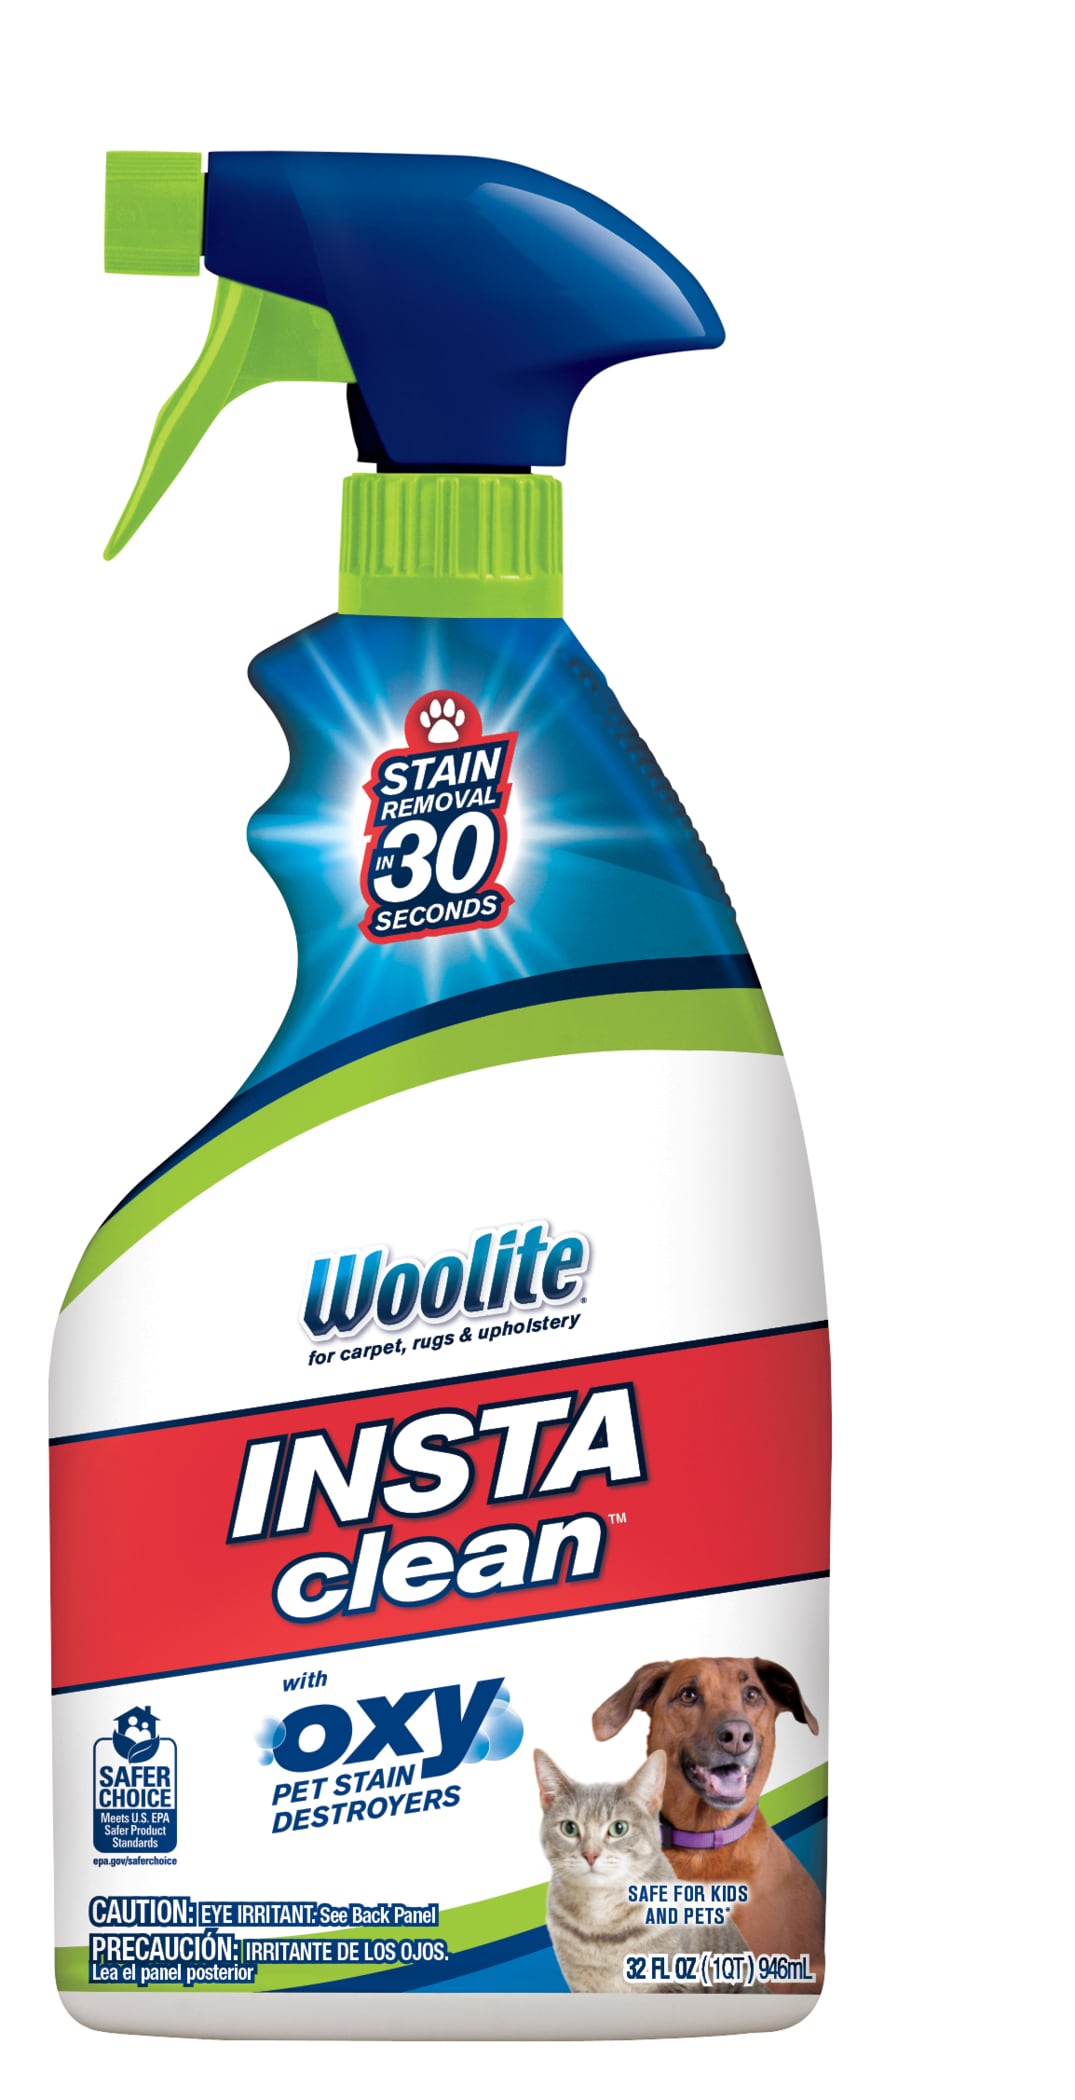 Woolite InstaClean 22 oz. Pet Stain Remover